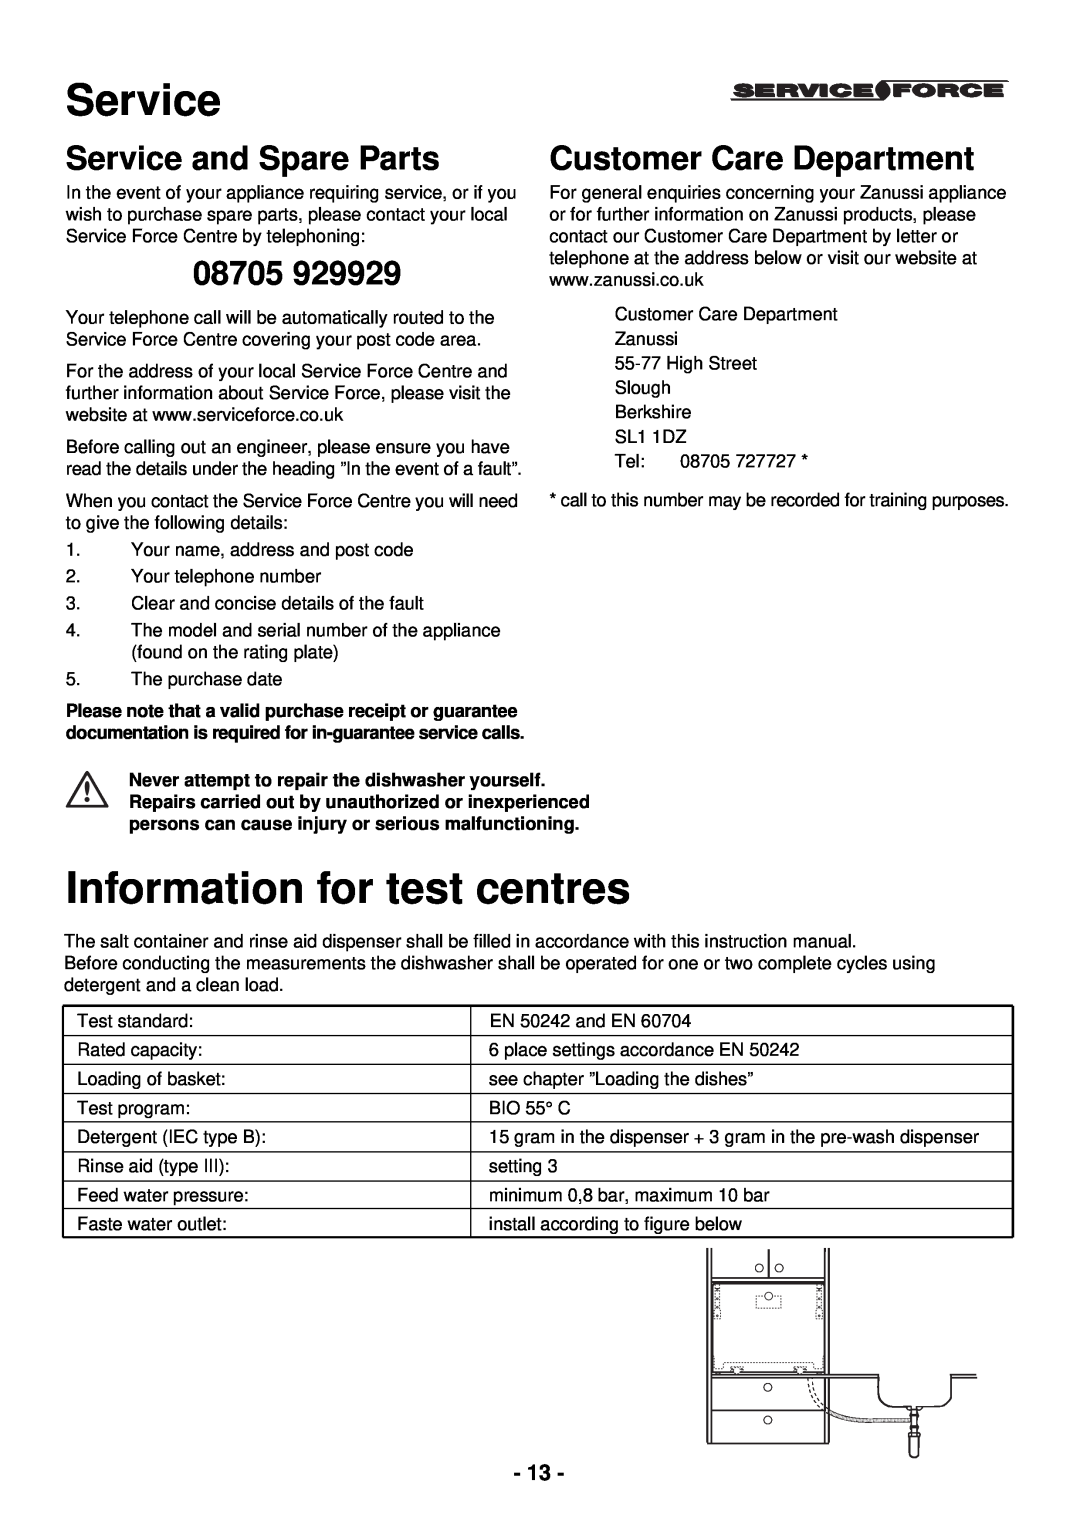 Zanussi ZDC 5465 manual Information for test centres, Service and Spare Parts, 08705, Customer Care Department 